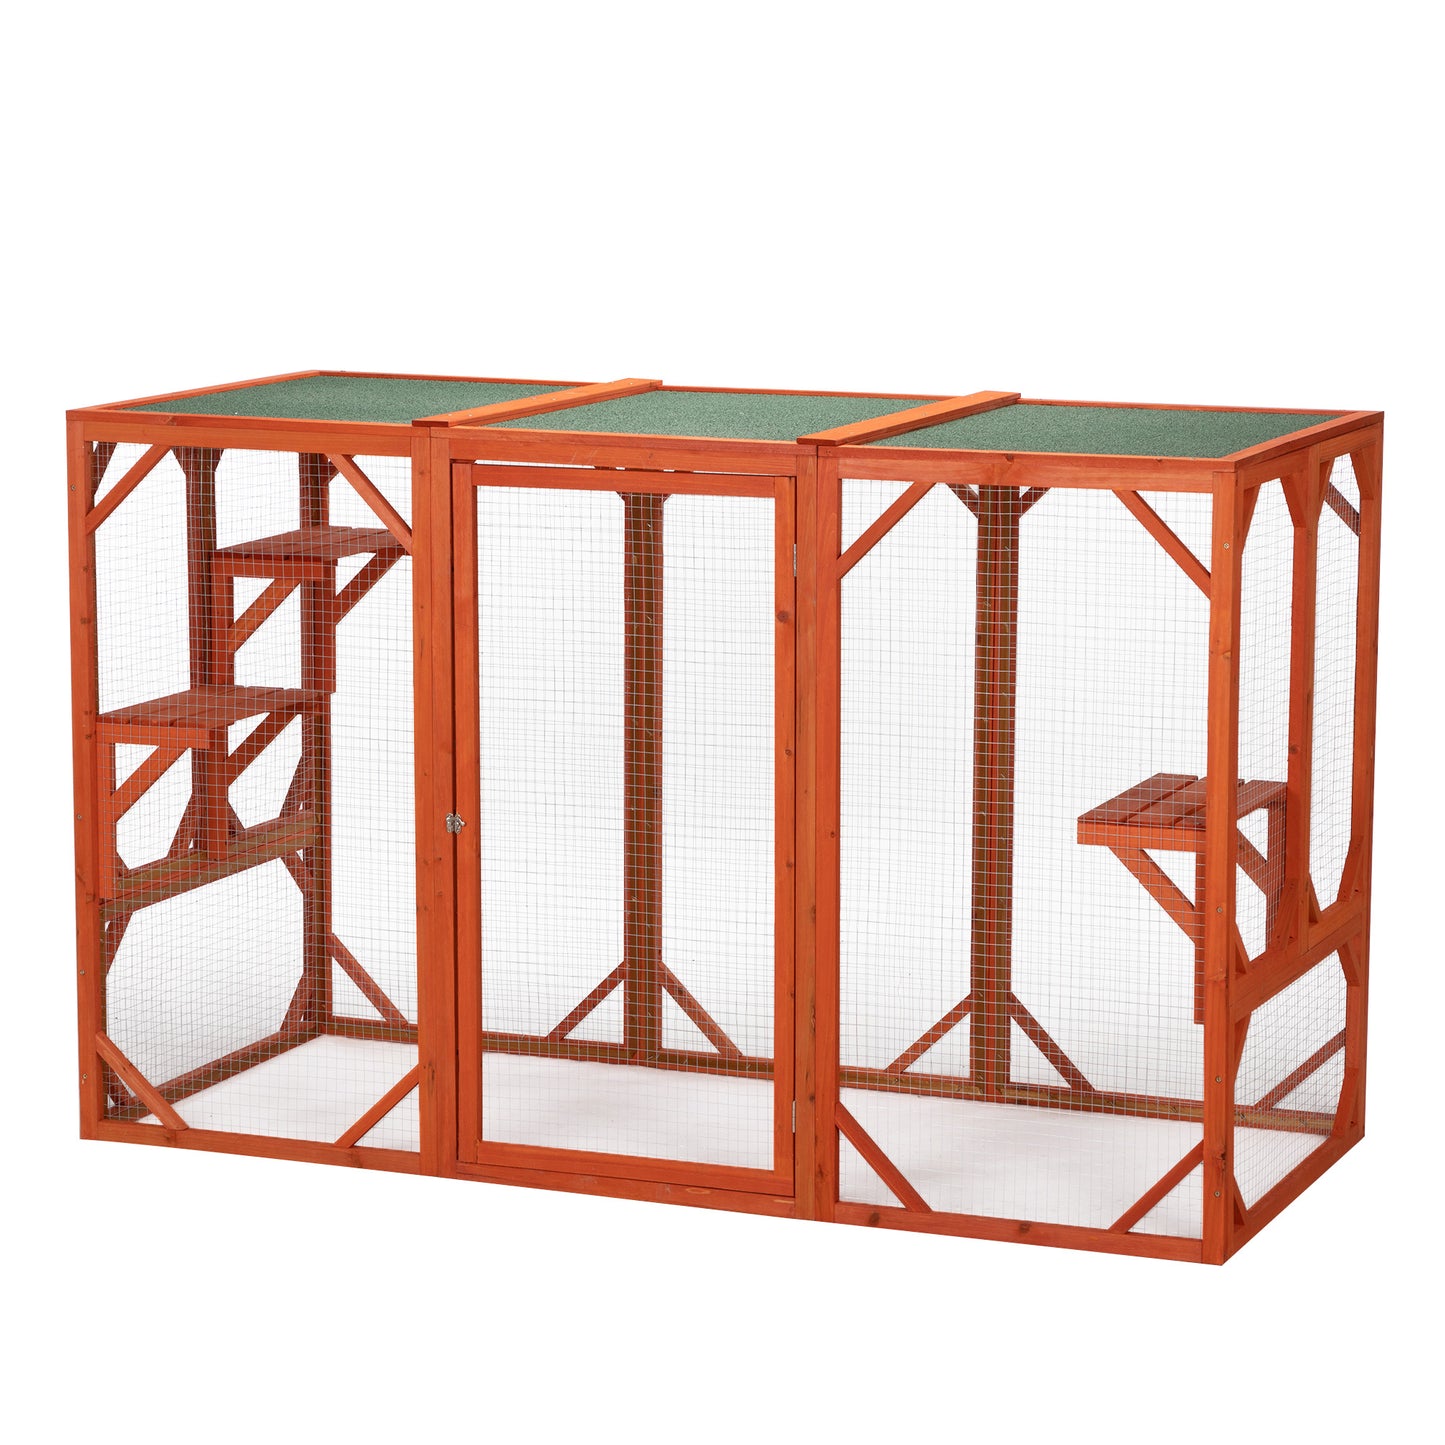 Wooden Cat House, Outdoor Cat Cage with Water-proof Asphalt Planks and Cat Perches, Orange